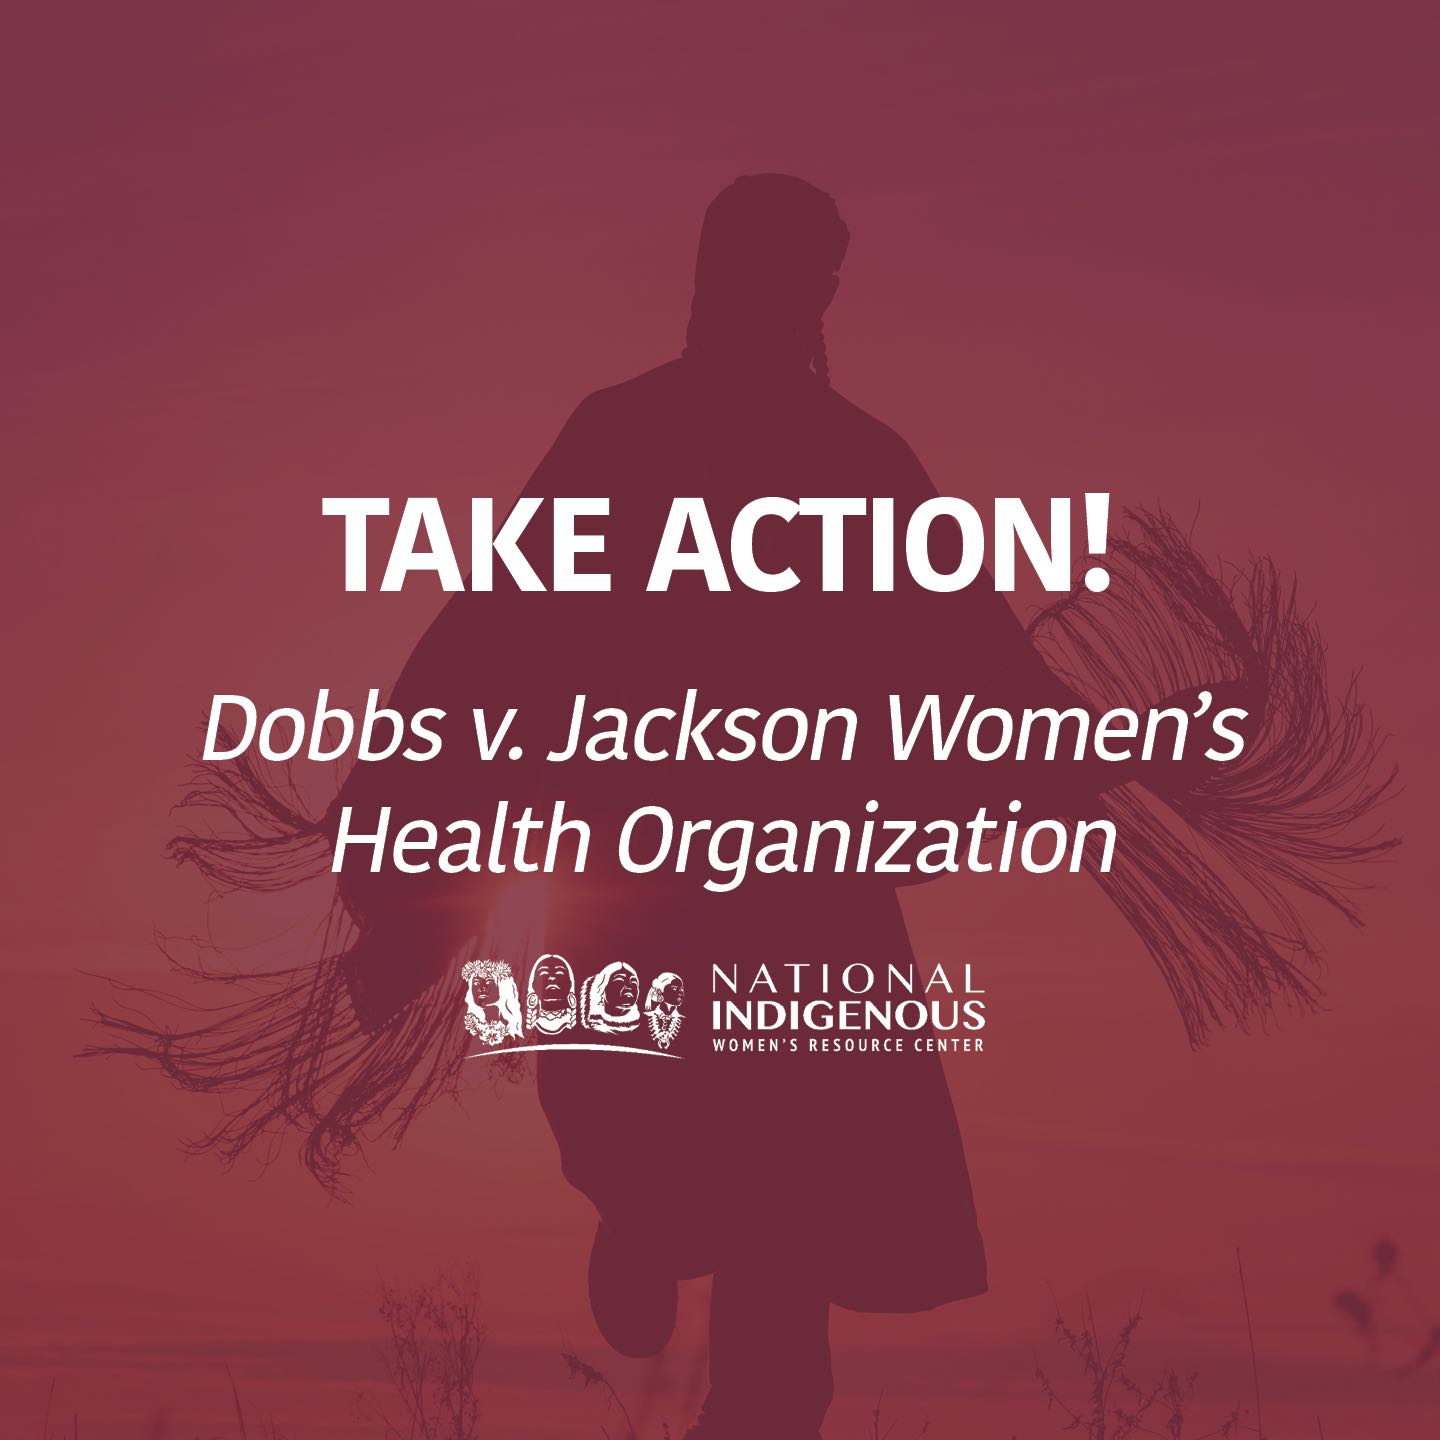 "Native woman in regalia in background with red color overlay, with text 'Take Action! Dobbs v. Jackson Women's Health Organization' and with NIWRC logo at bottom."